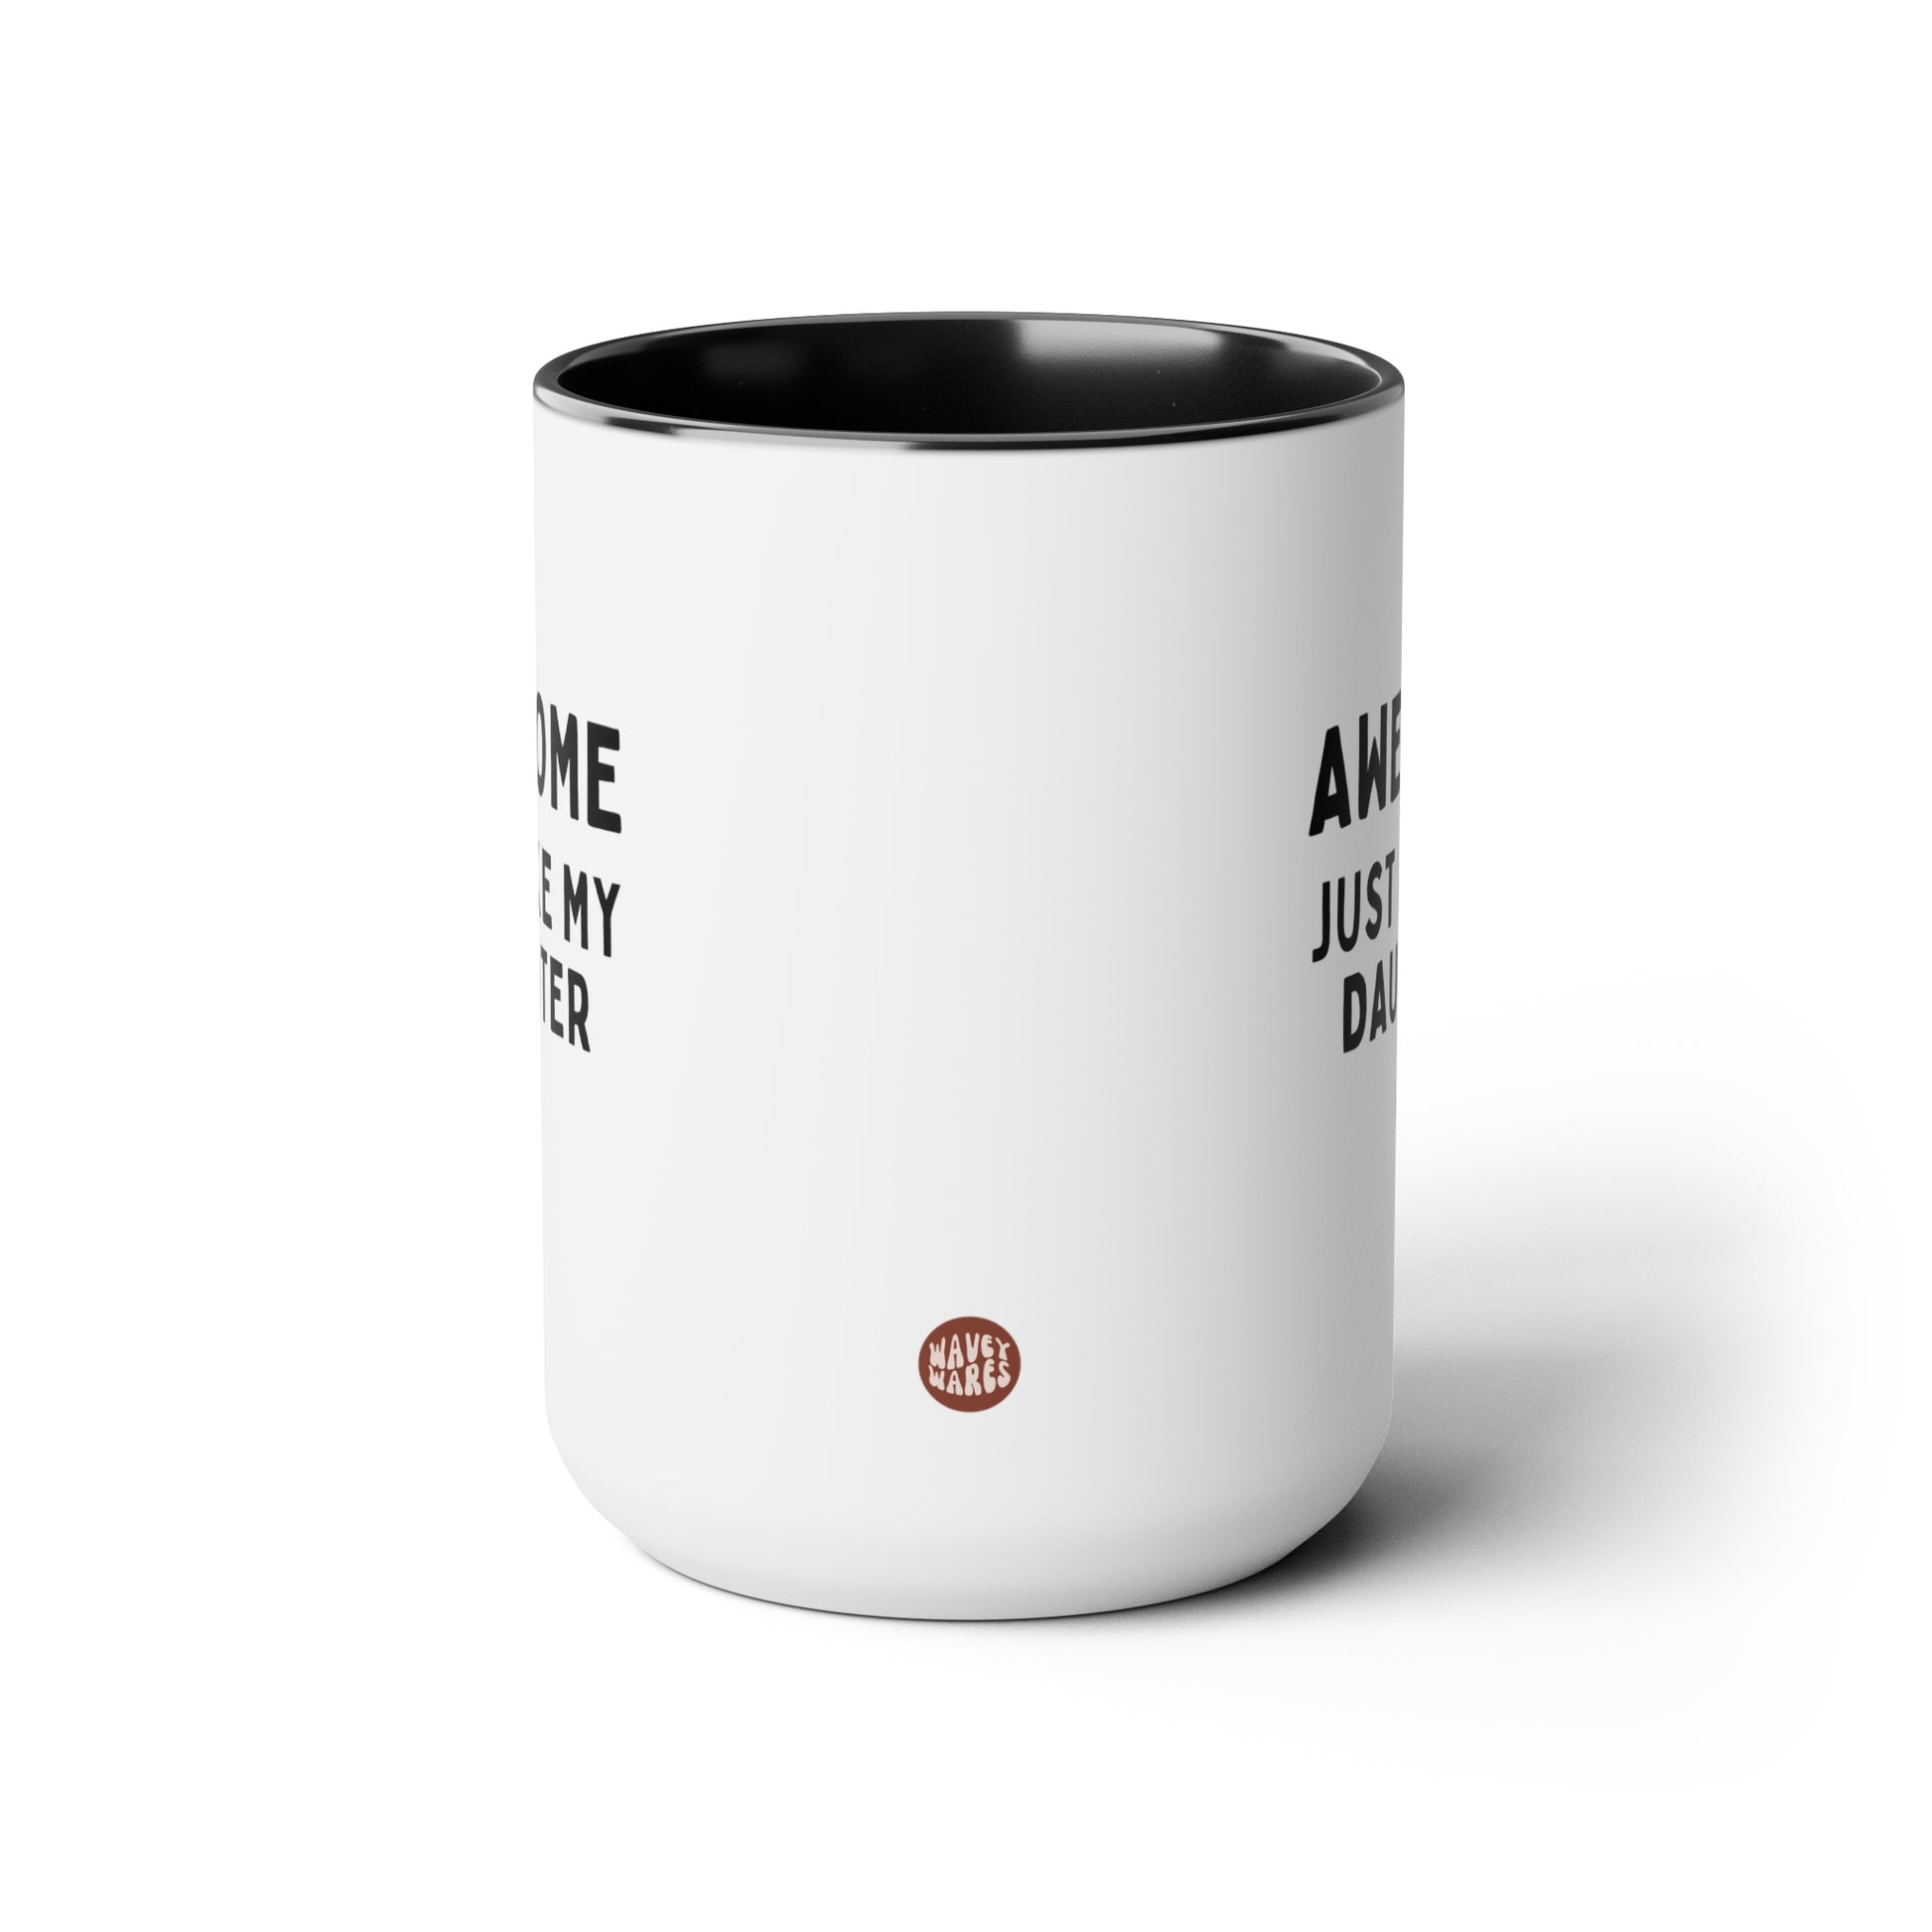 Awesome Just Like My Daughter 15oz white with black accent funny large coffee mug gift for husband daughter to dad fathers day cup waveywares wavey wares wavywares wavy wares side